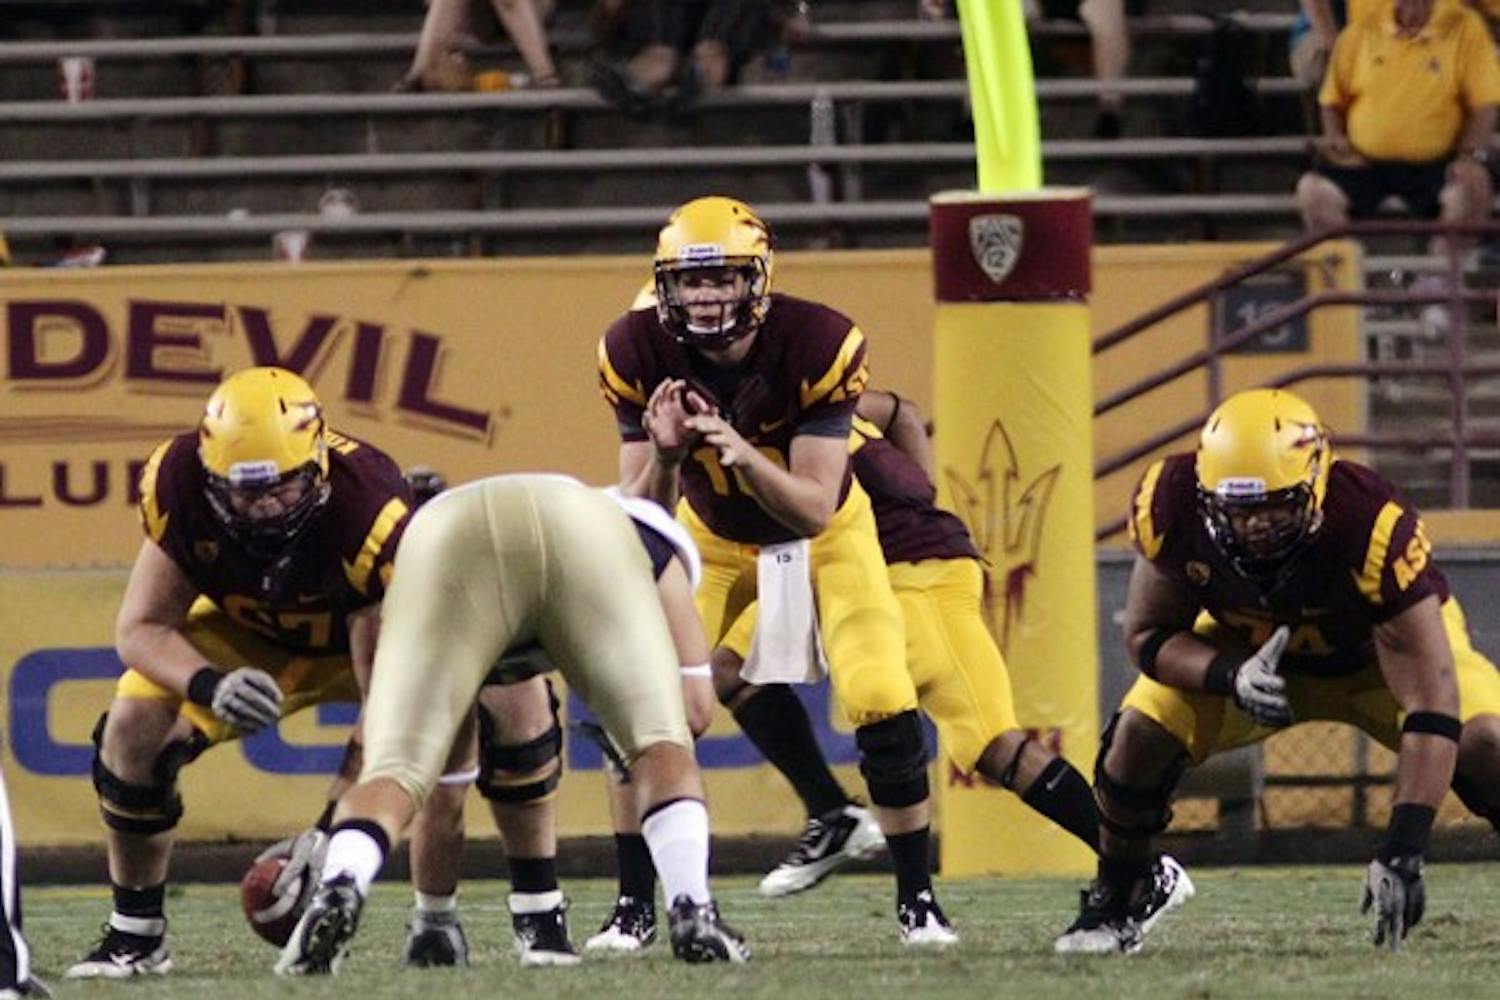 READY: Freshman backup quarterback Taylor Kelly prepares to call a snap during the fourth quarter of the Sun Devils’ 48-14 win over UC Davis on Sept. 1. Kelly and redshirt freshman quarterback Mike Bercovici remain vital to the team despite being behind junior starter Brock Osweiler on the depth chart. (Photo by Beth Easterbrook)